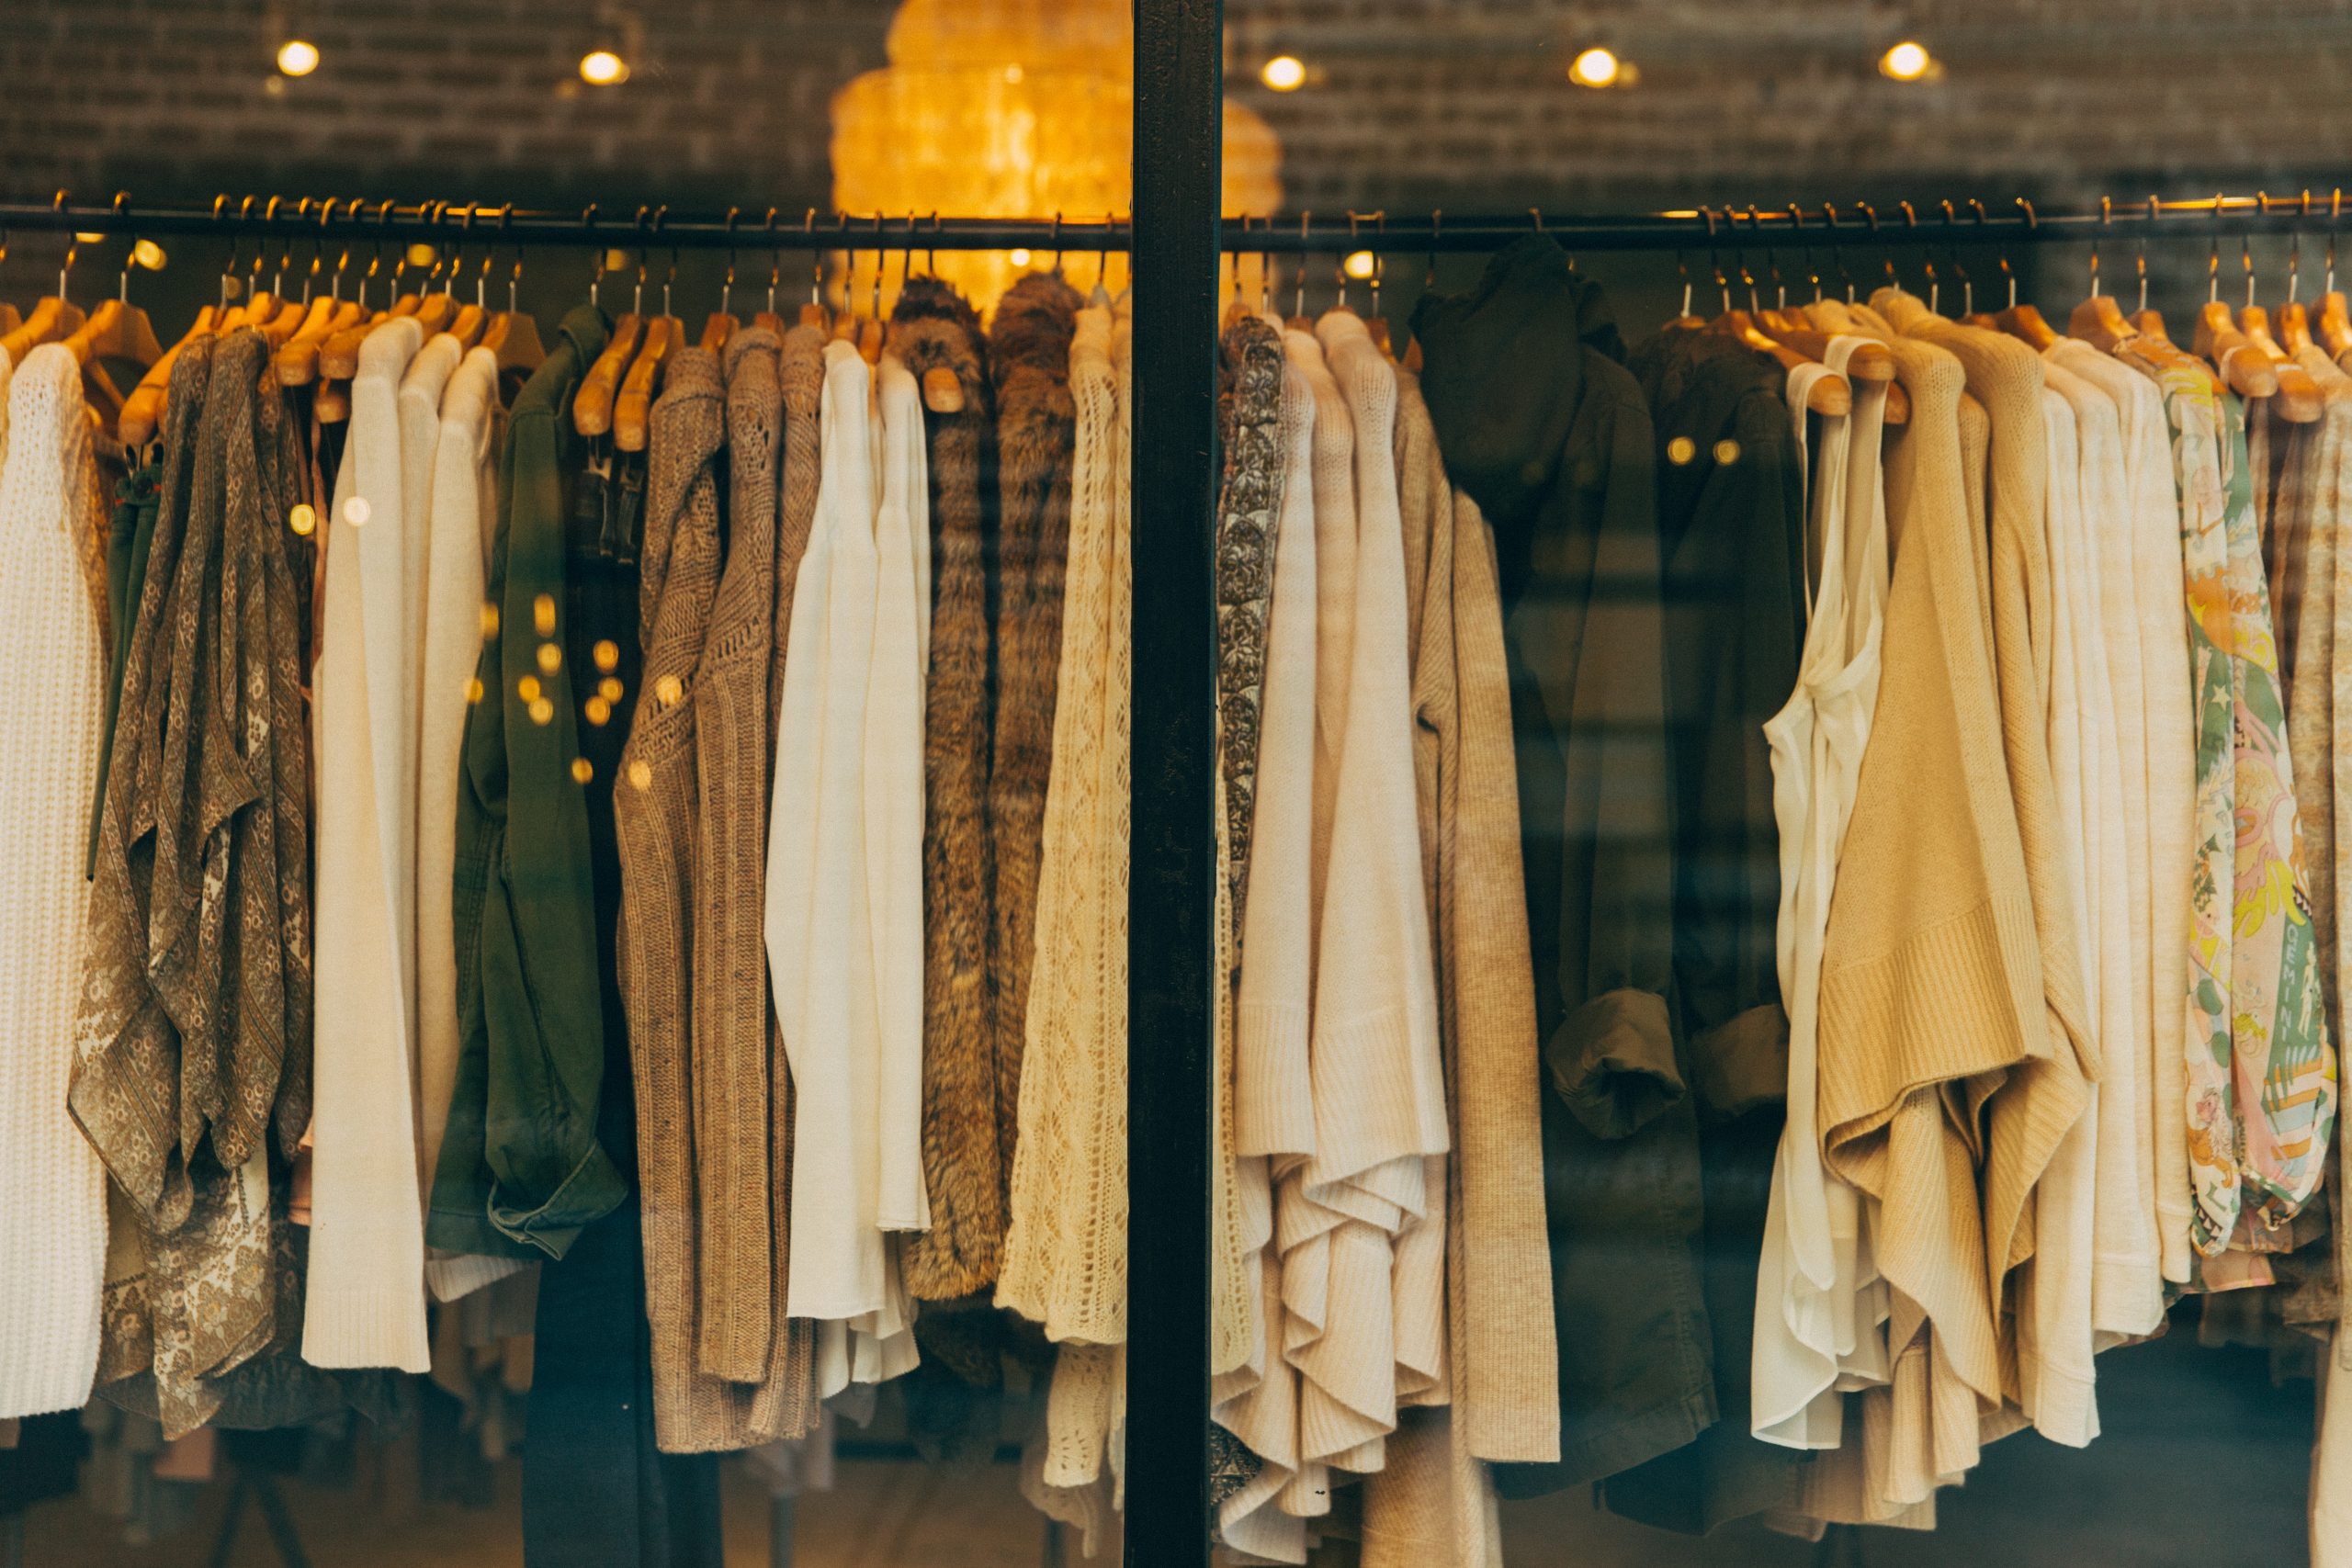 The 7 Best Hemp Clothing Brands to Shop Sustainably in 2020 - The Manual